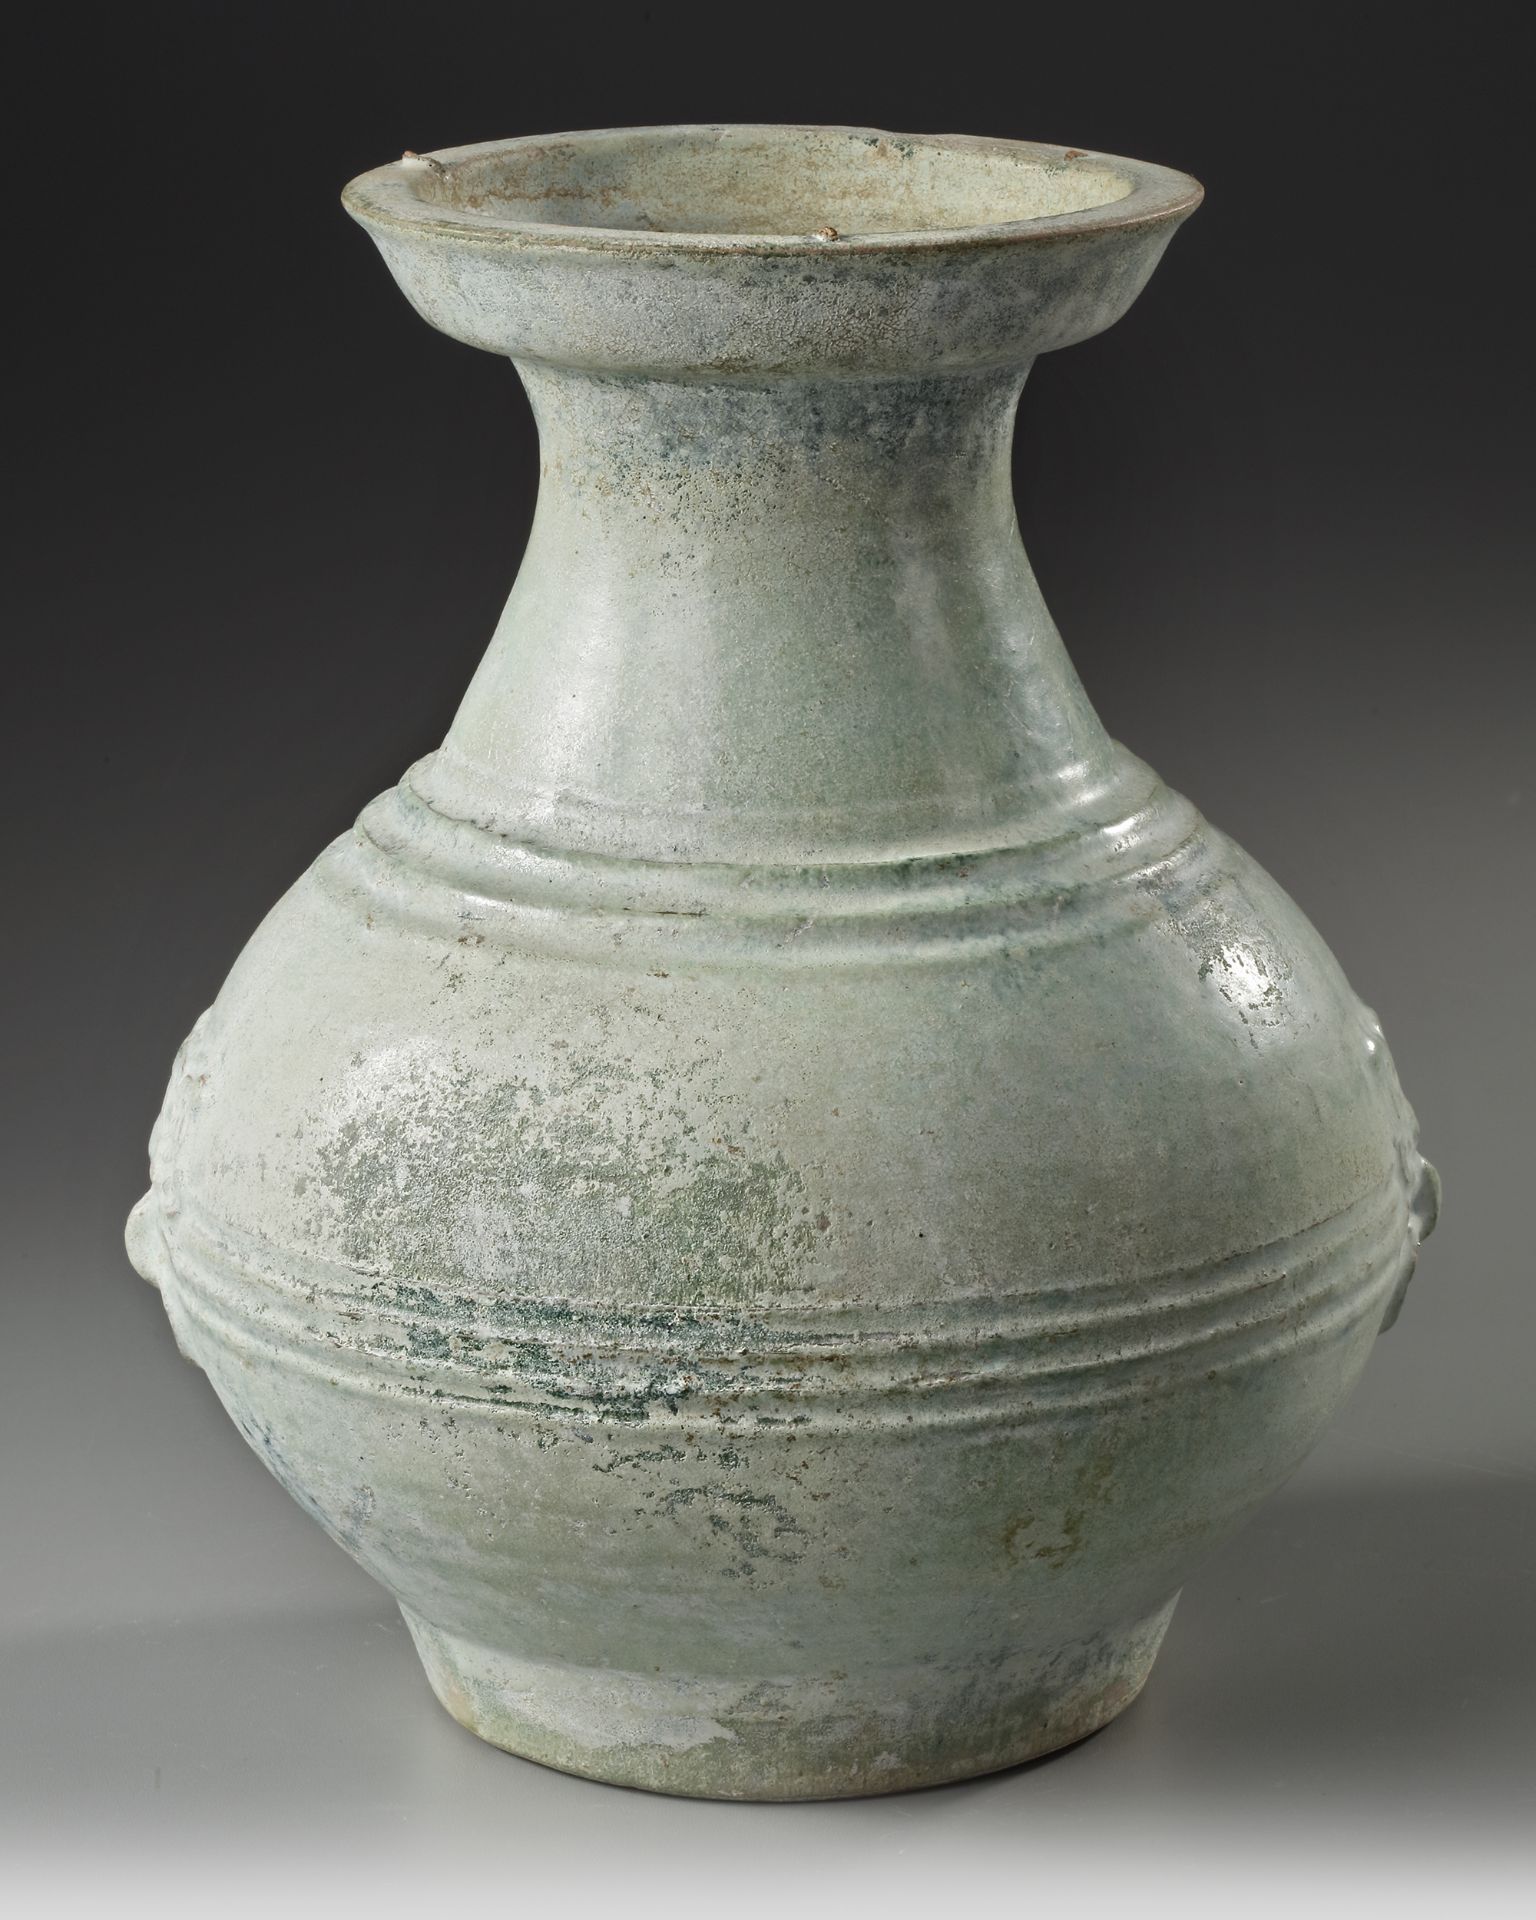 A CHINESE HU VASE WITH TAOTIE MASKS, HAN DYNASTY (206 BC-220 AD) - Image 3 of 5